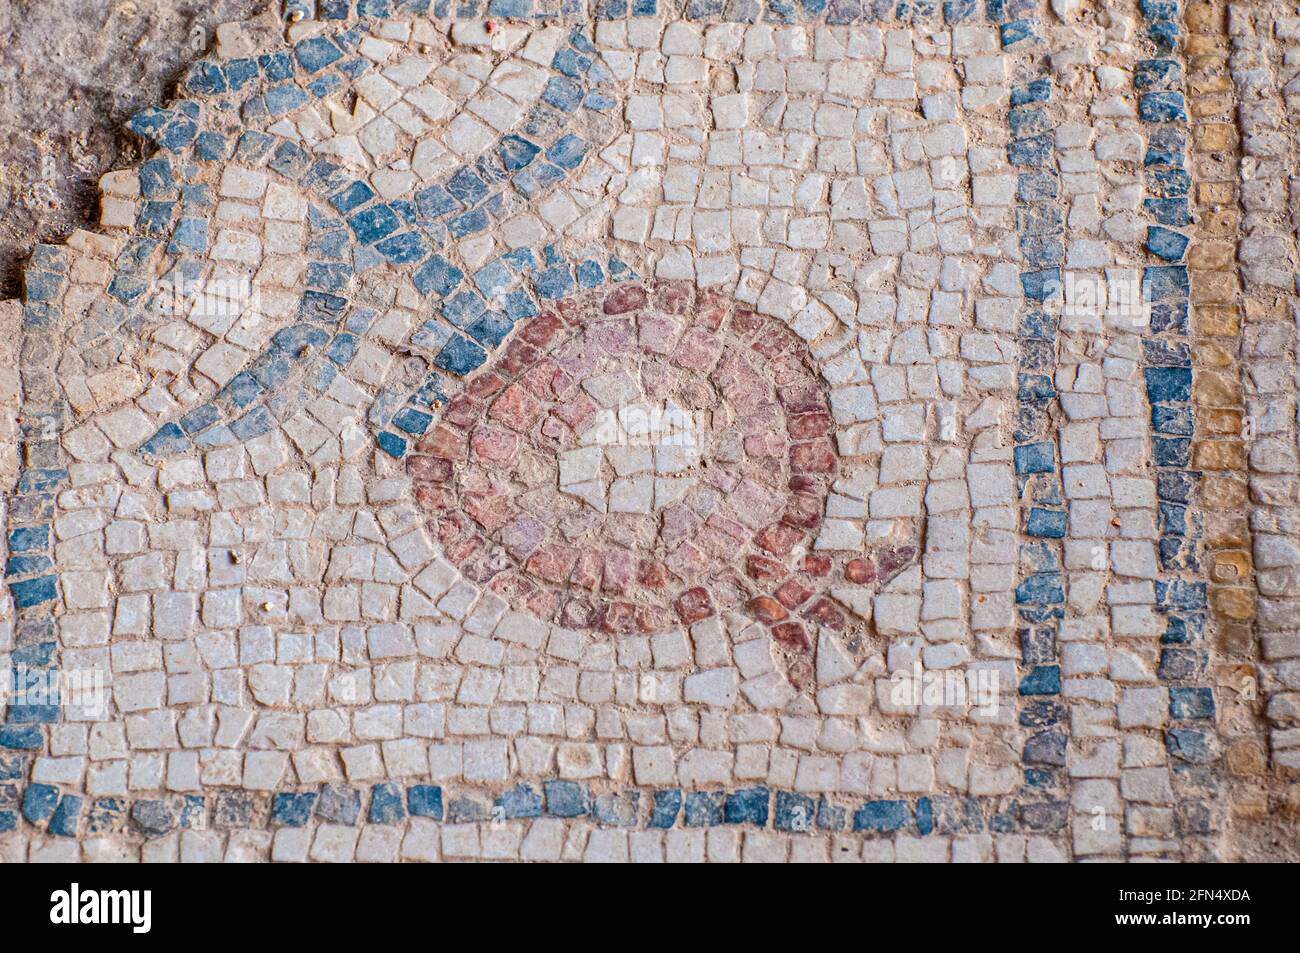 Pomegranate fruit mosaic floor design in the Nile House at Zippori National Park The city of Zippori (Sepphoris) A Roman Byzantine period city with an Stock Photo